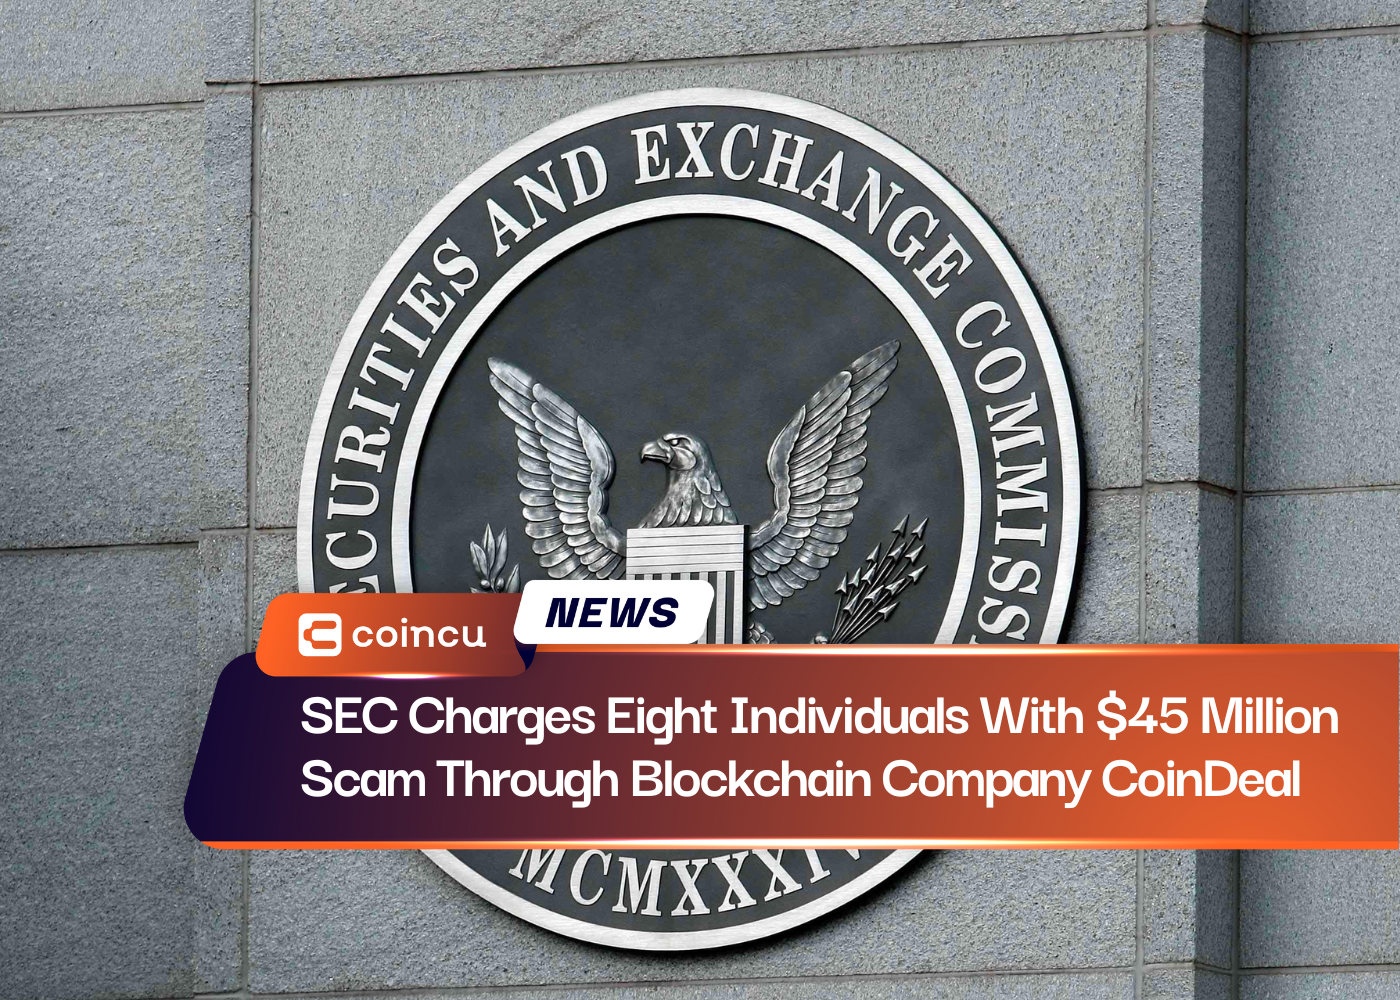 SEC Charges Eight Individuals With $45 Million Scam Through Blockchain Company CoinDeal